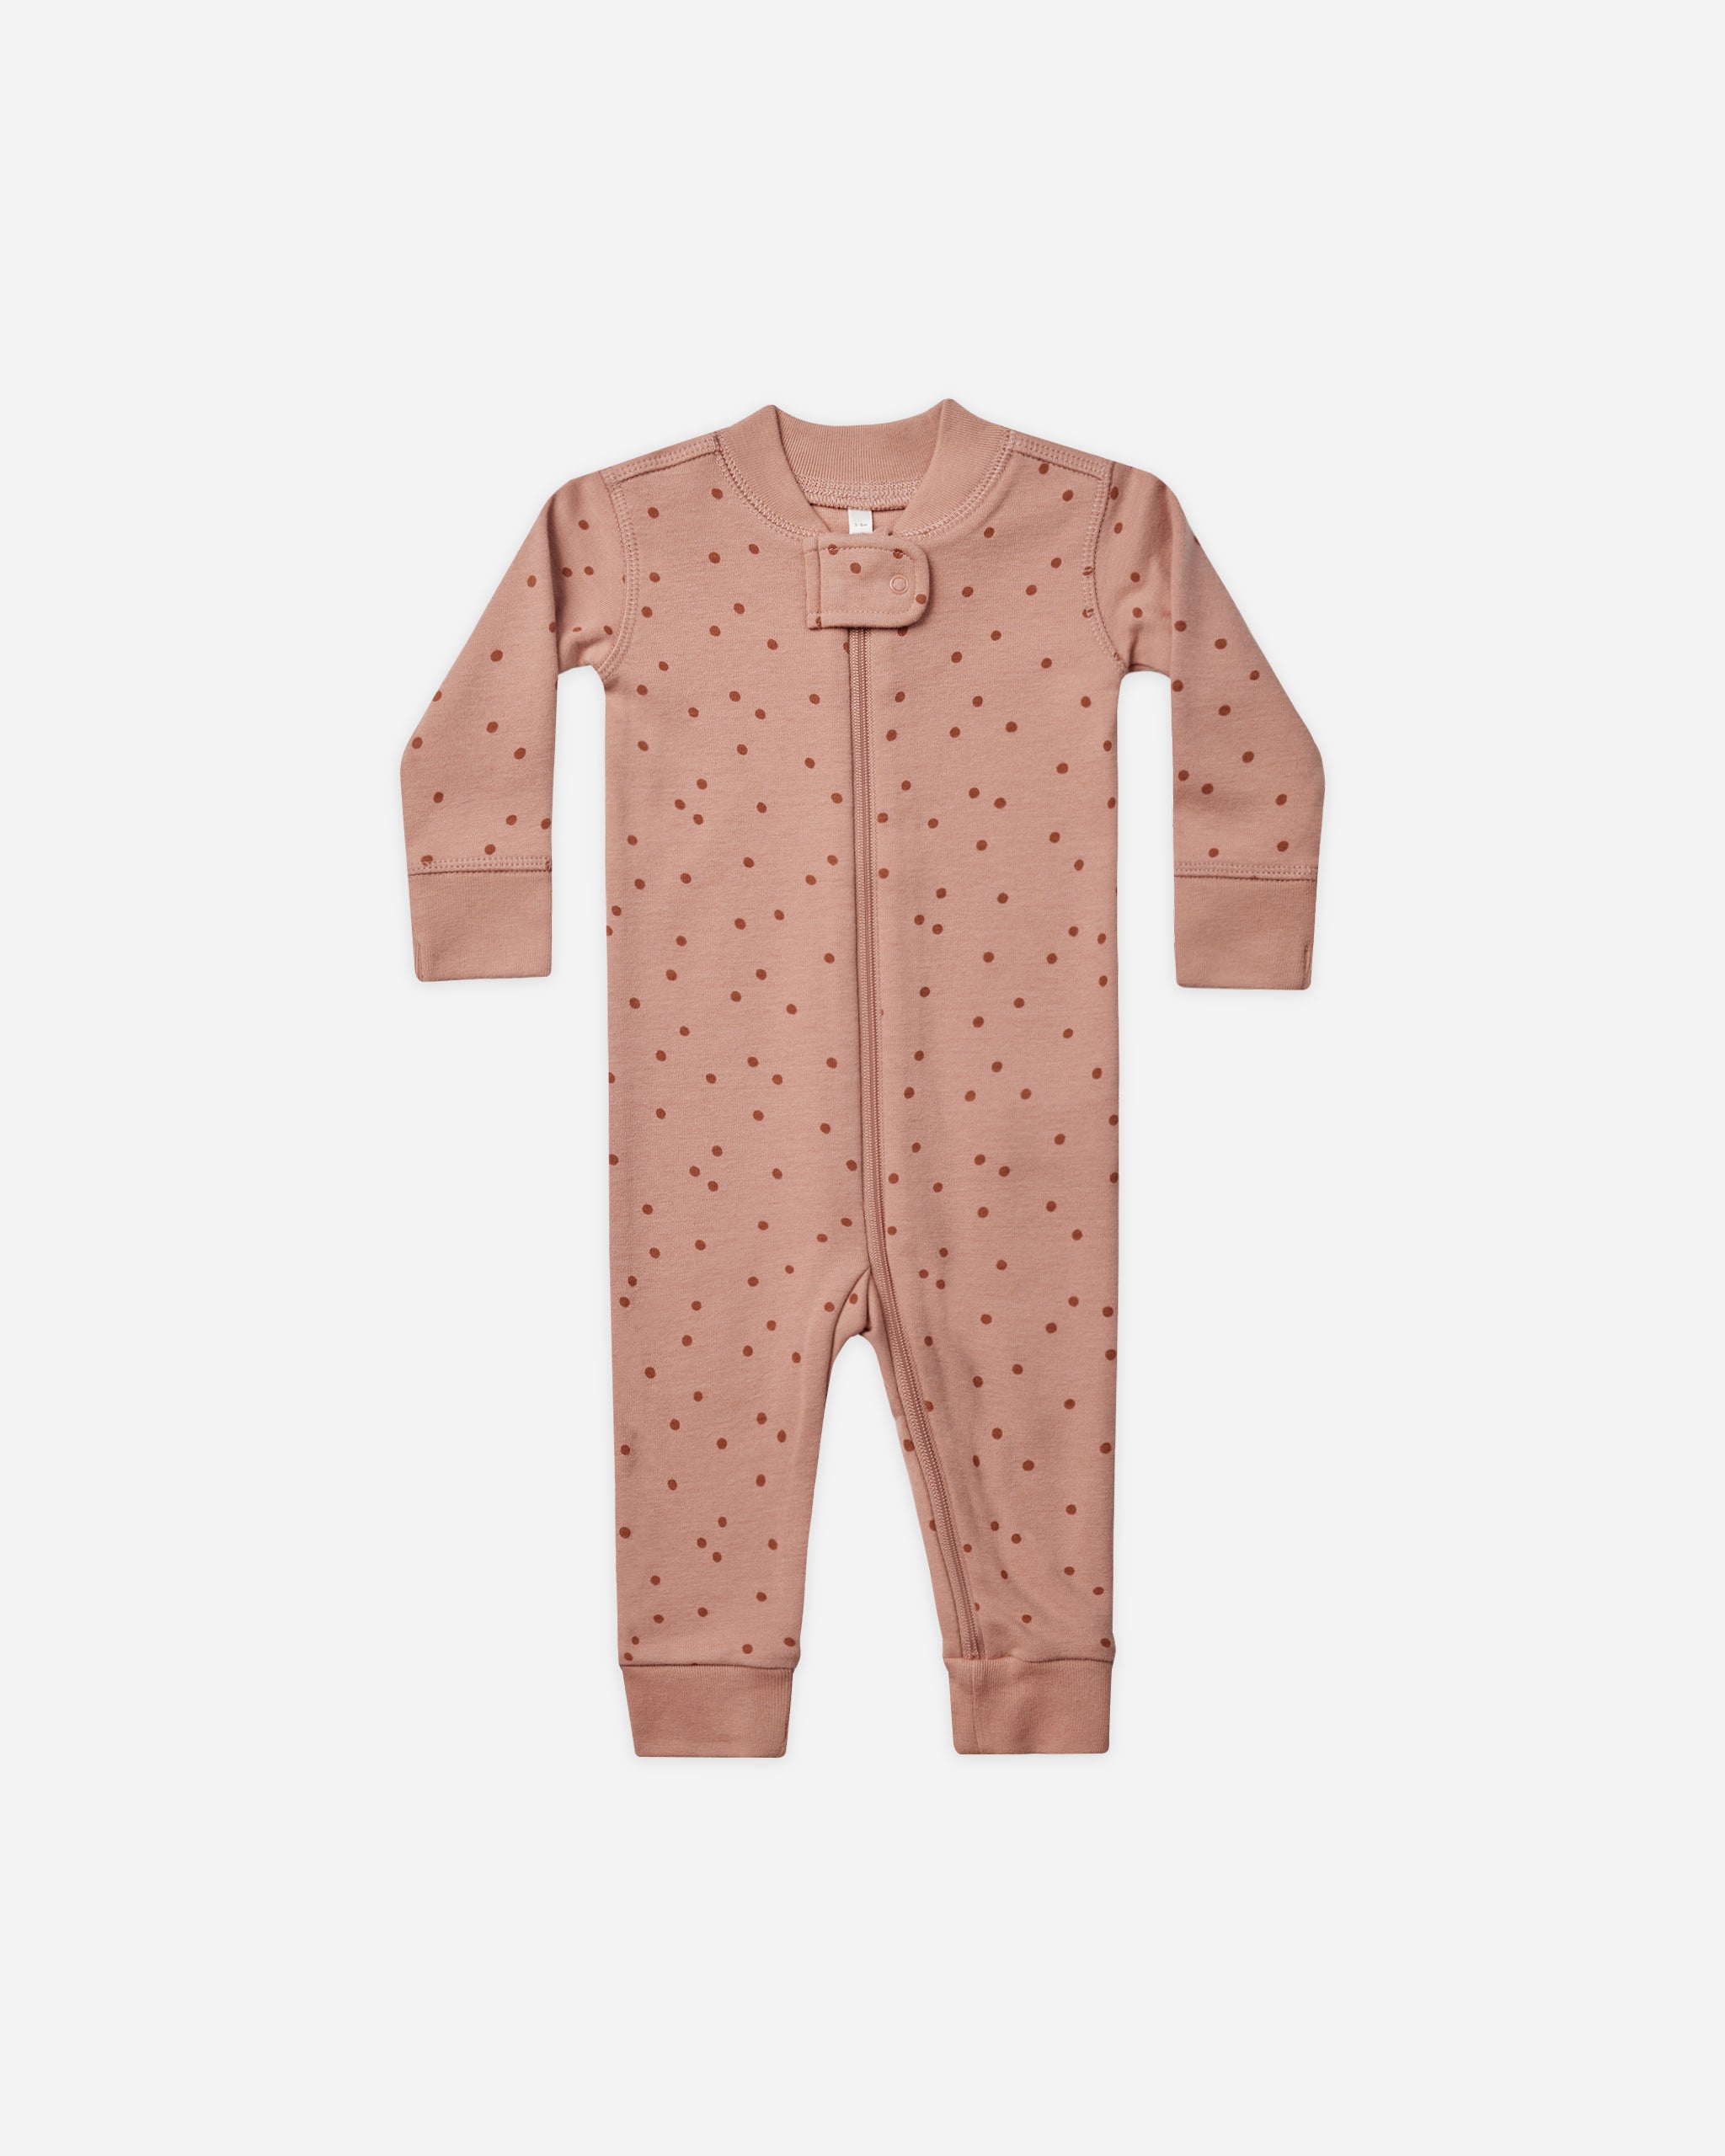 Zip Long Sleeve Sleeper || Polka Dot - Rylee + Cru | Kids Clothes | Trendy Baby Clothes | Modern Infant Outfits |